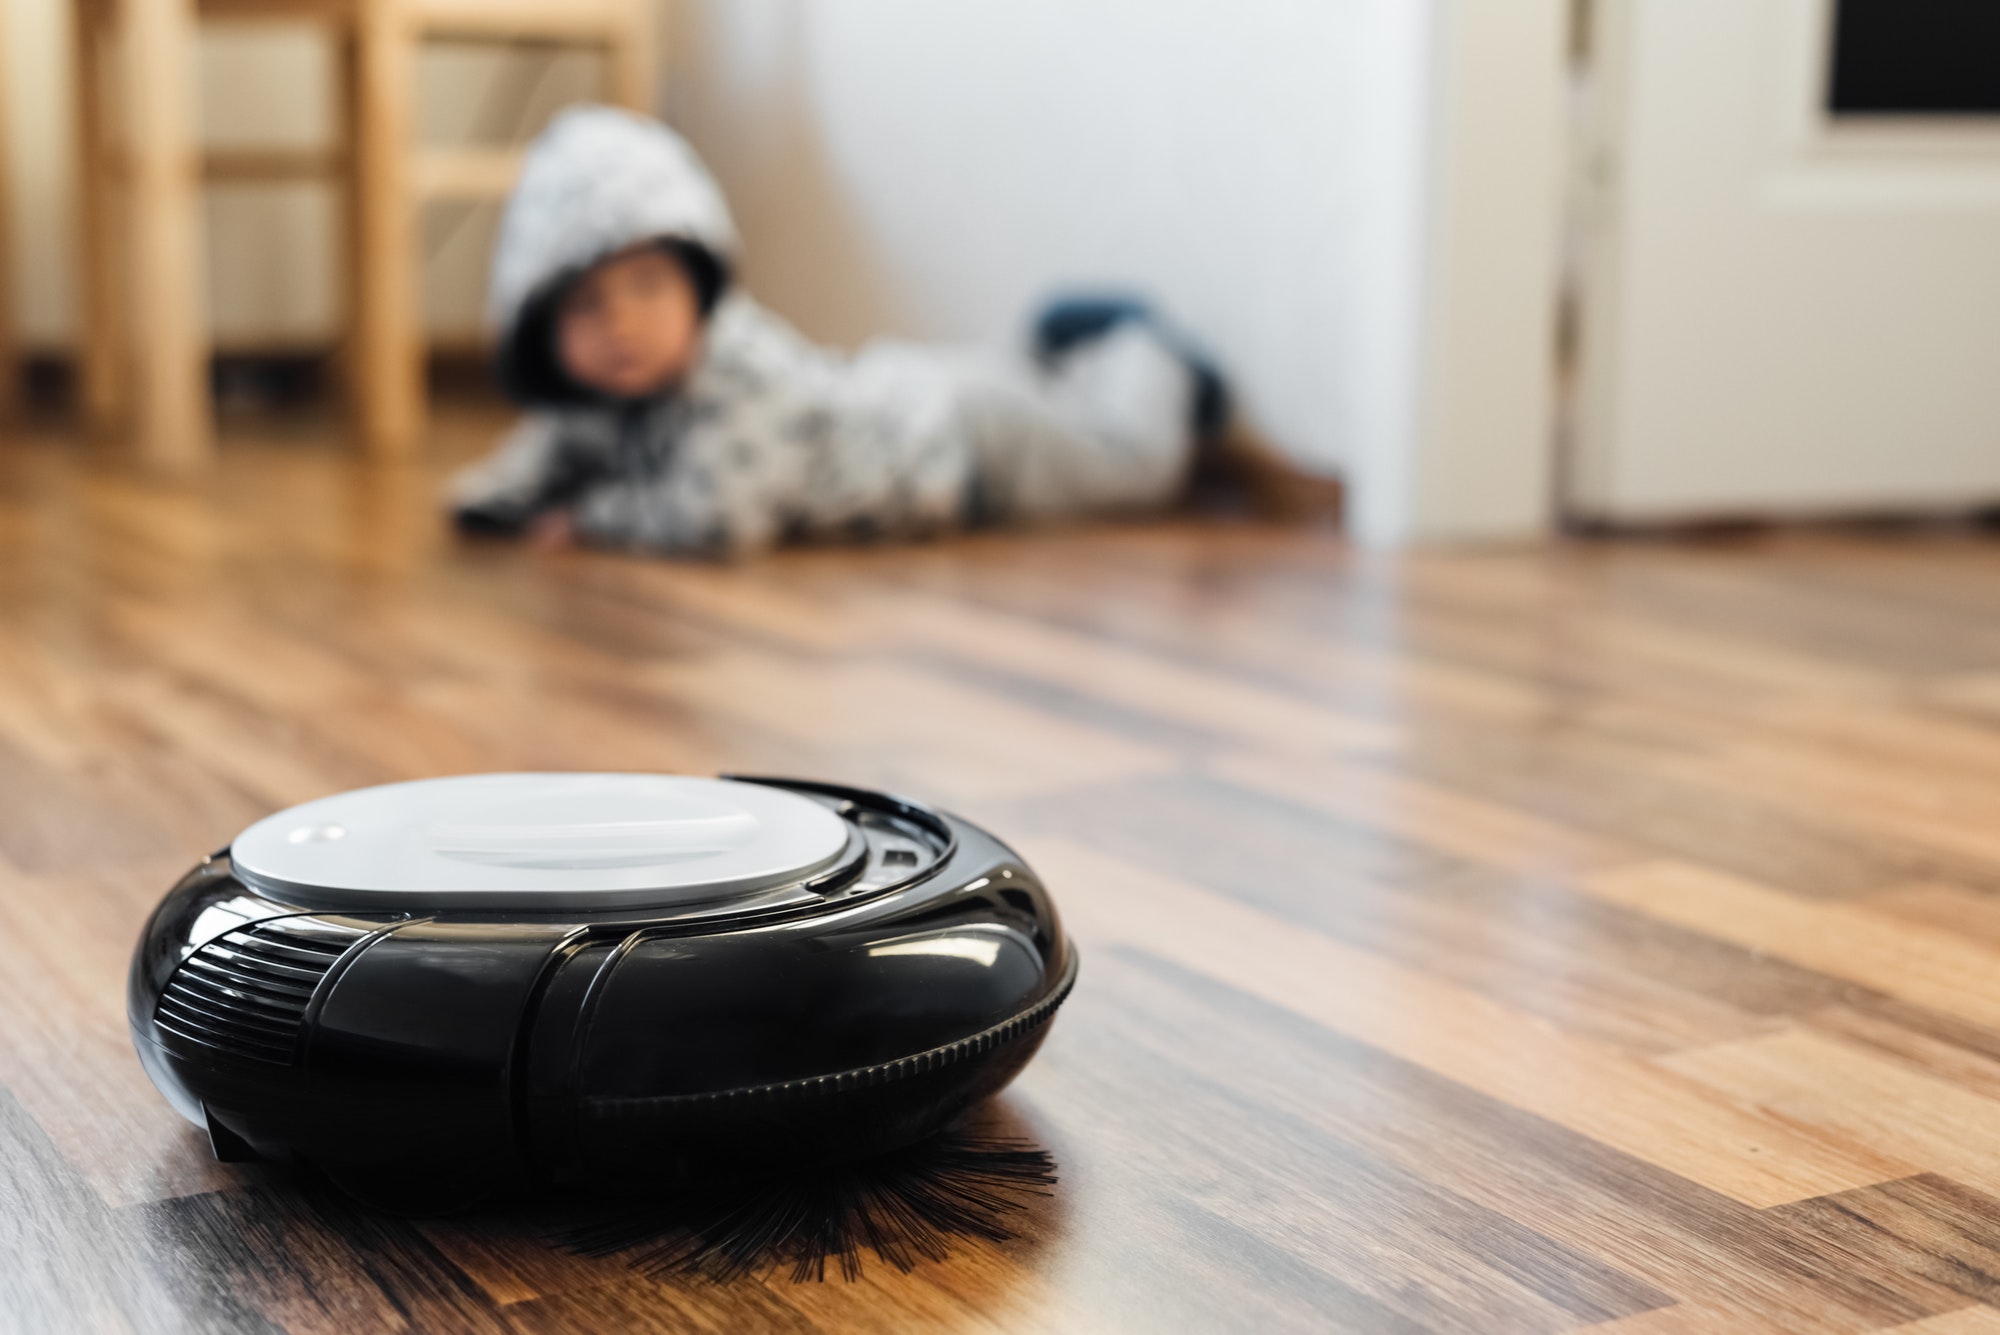 Online shopping trends: robotic vacuum cleaner on a wood floor